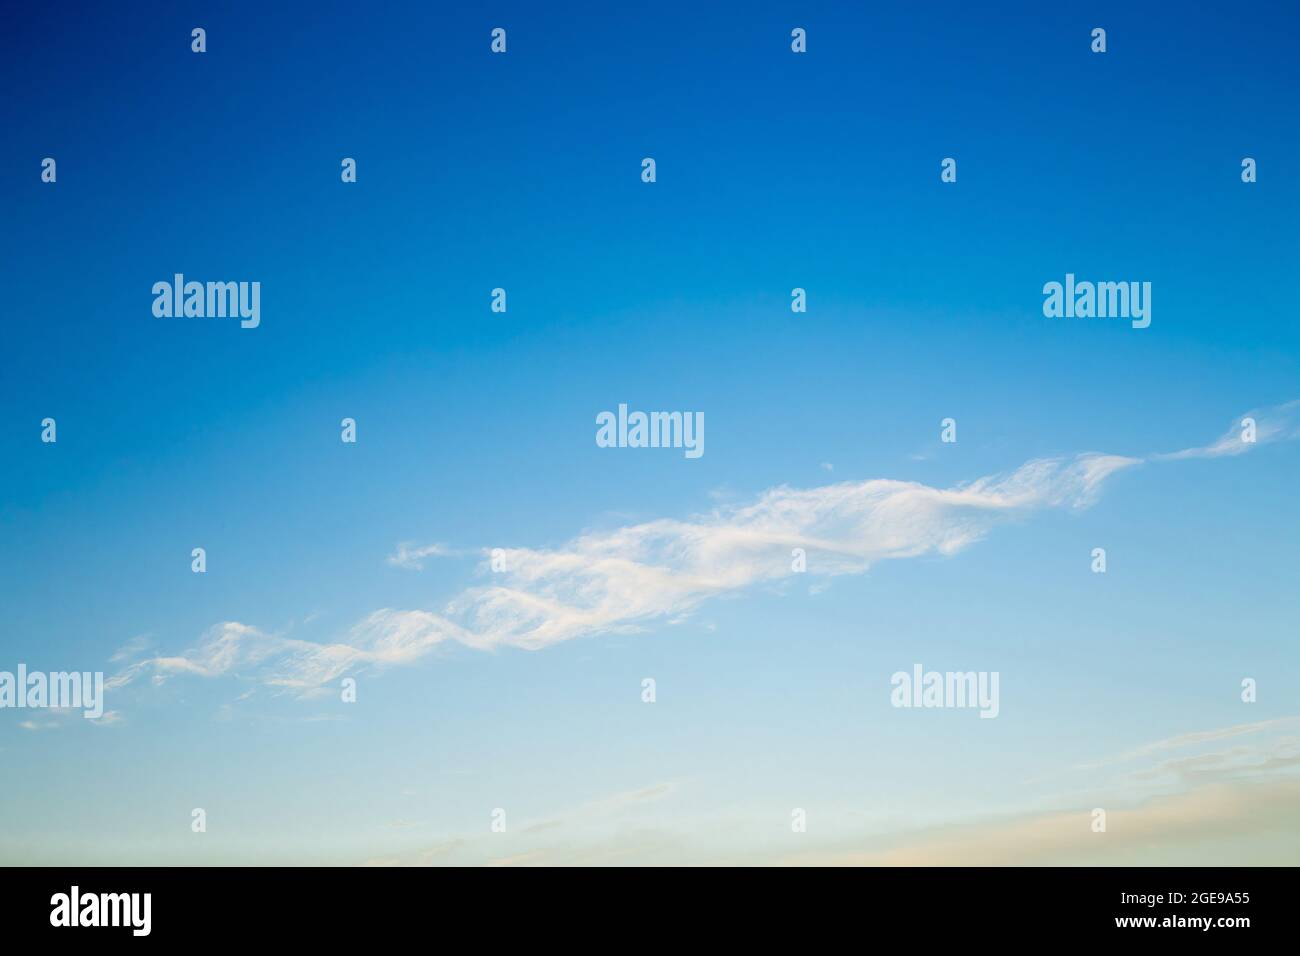 Beautiful blue sky with a white cloud in the form of a DNA helix. Sky panorama for screensavers, postcards, calendar, presentations. Warm summer day. Stock Photo